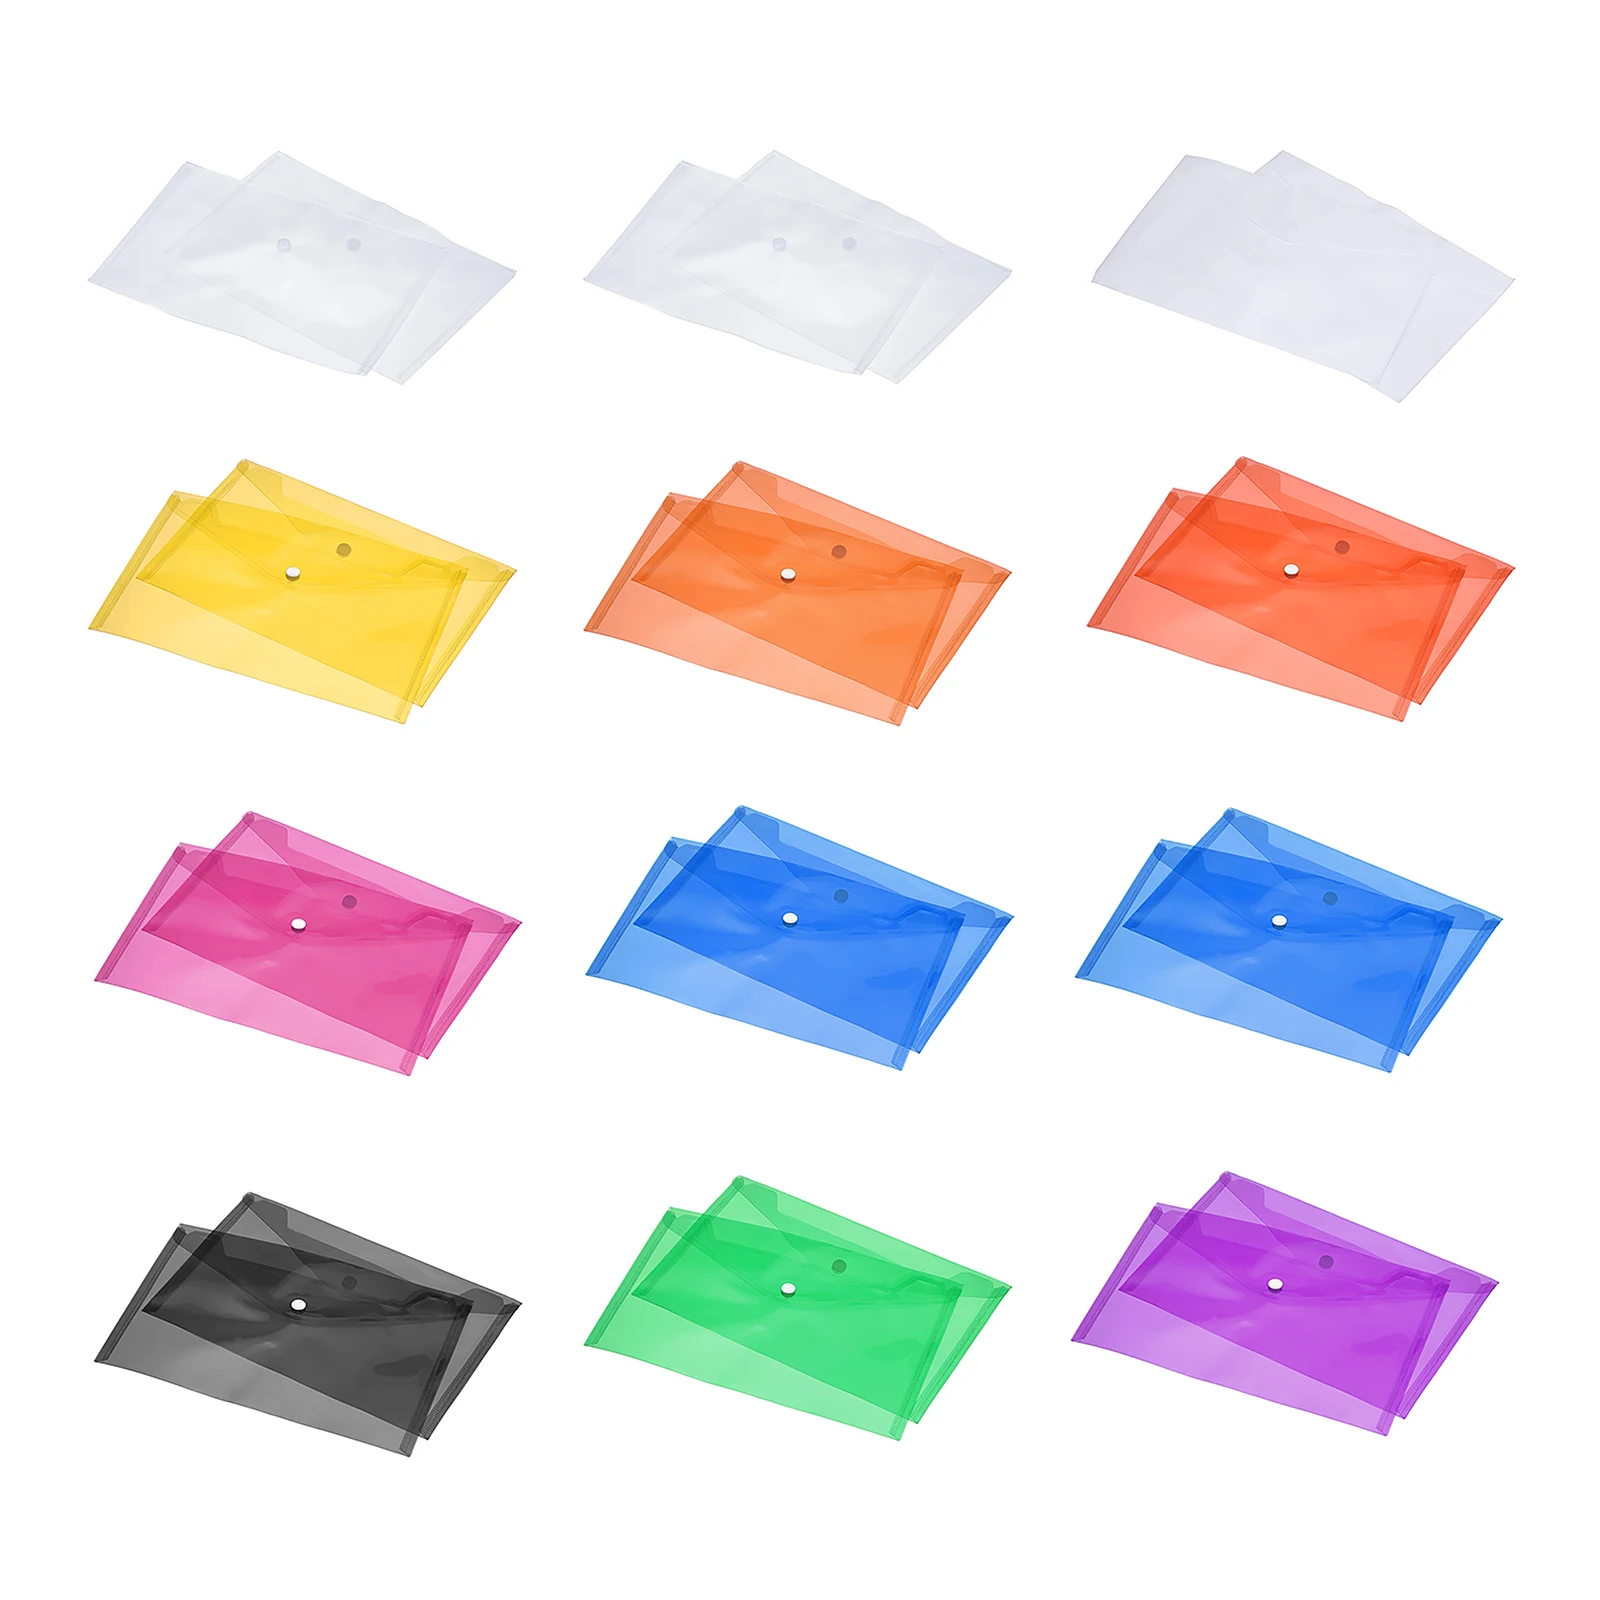 12Pcs A4 Size Plastic File Folders Clear Envelopes Document Organizer with Snap Button PP File Bags for Home Office Stationery